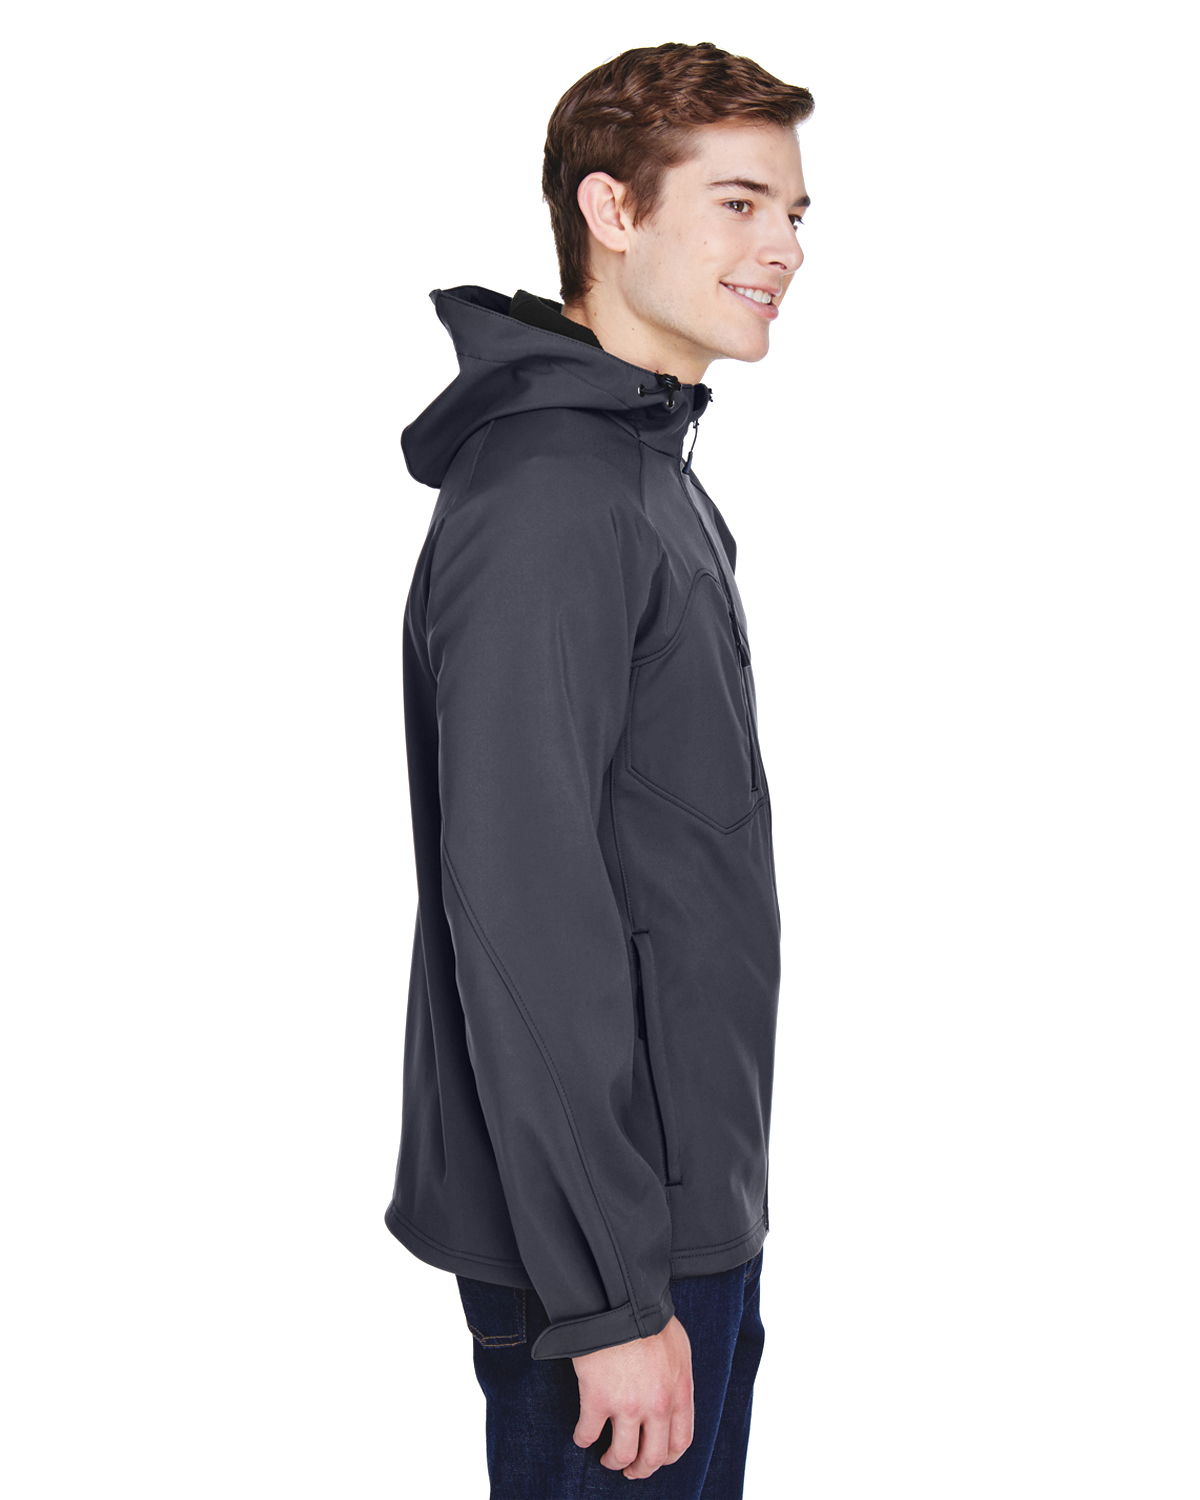 Men's Prospect Two-Layer Fleece Bonded Soft Shell Hooded Jacket - FOSSIL GREY - XL - image 3 of 3